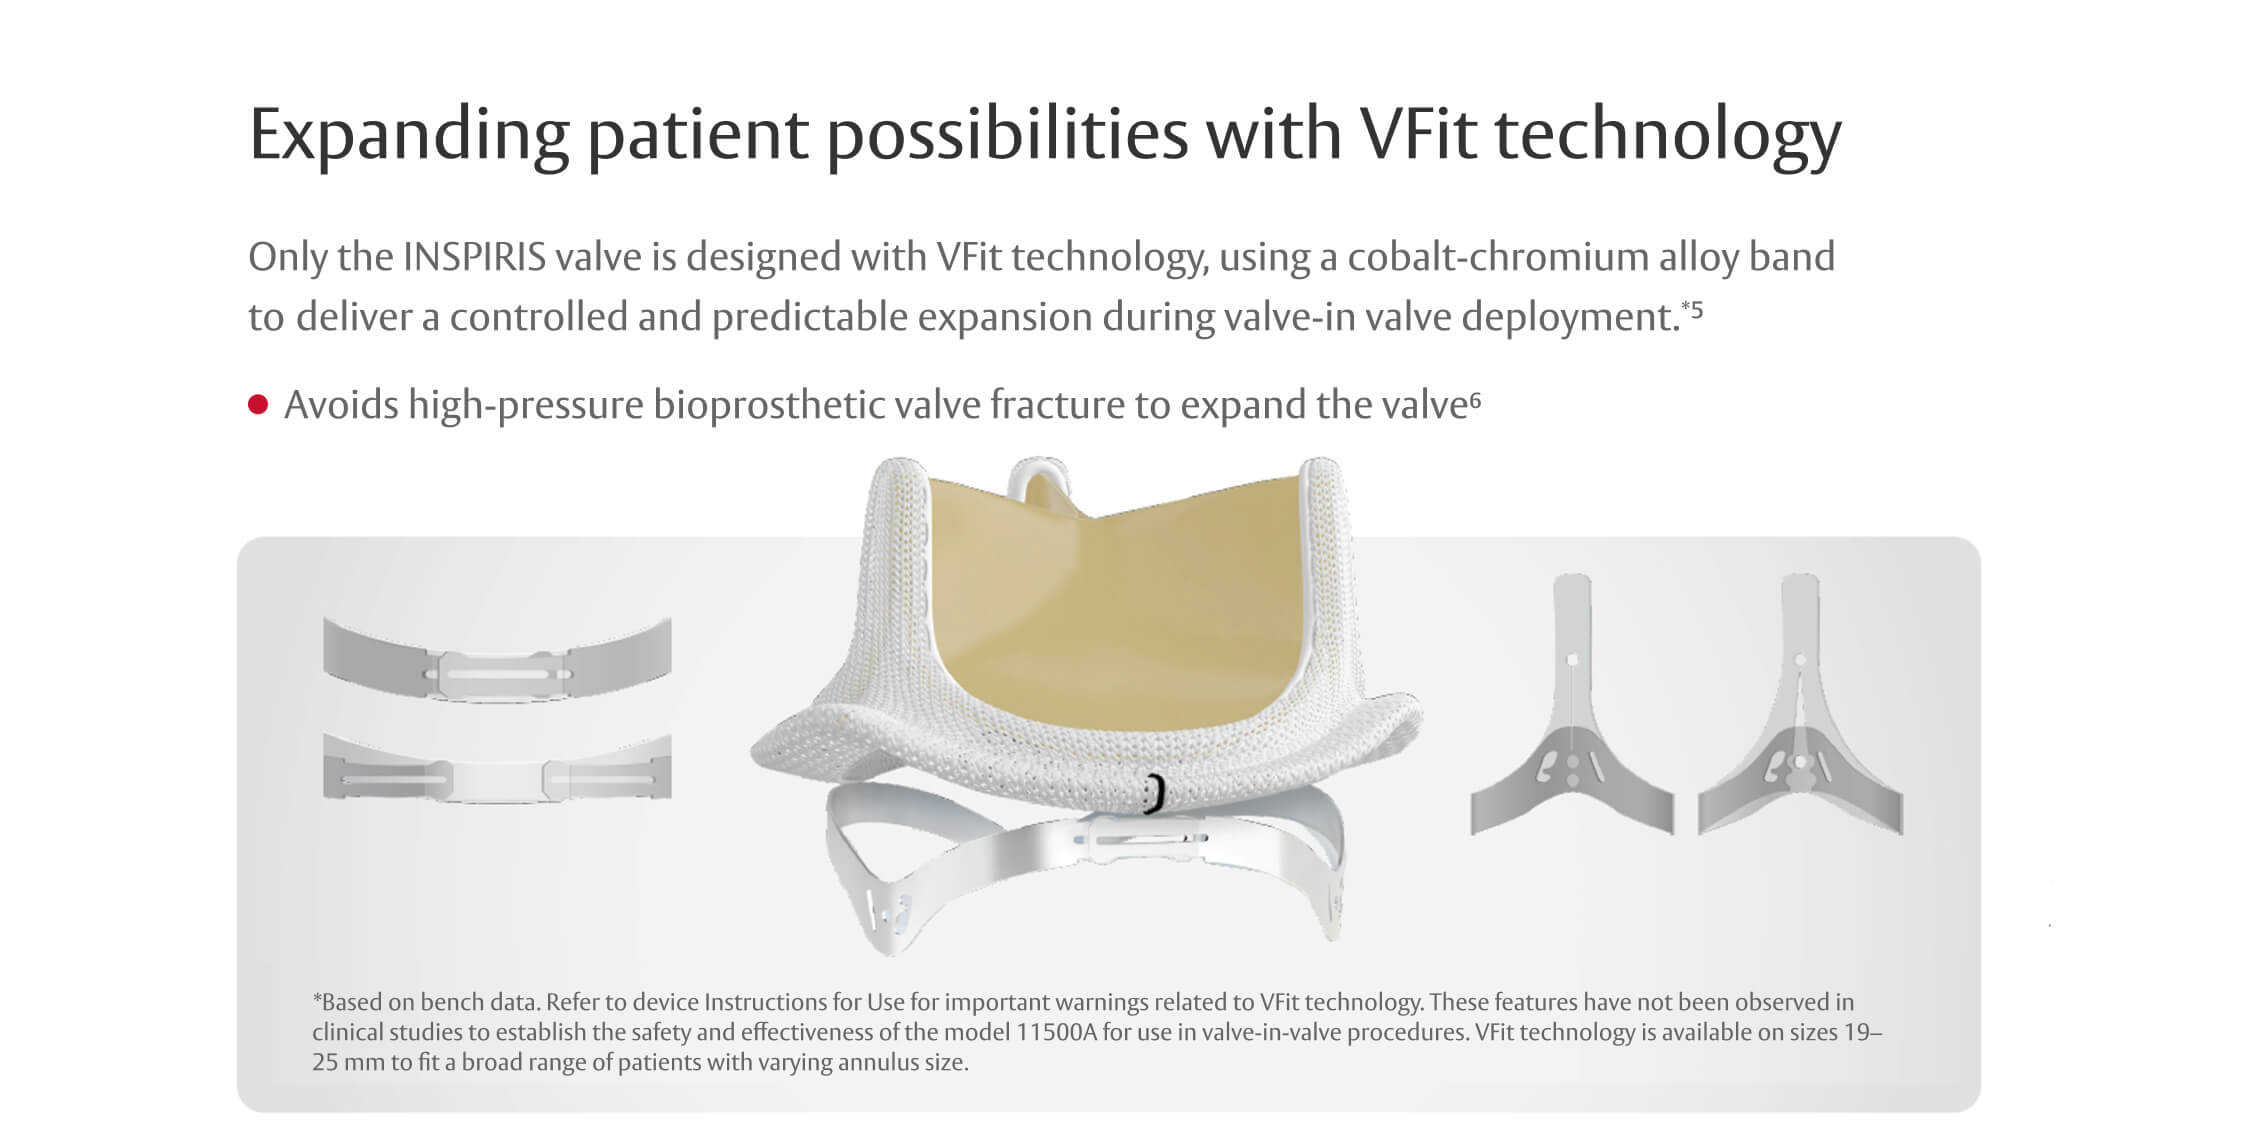 Expending patient possibilities with VFit technology